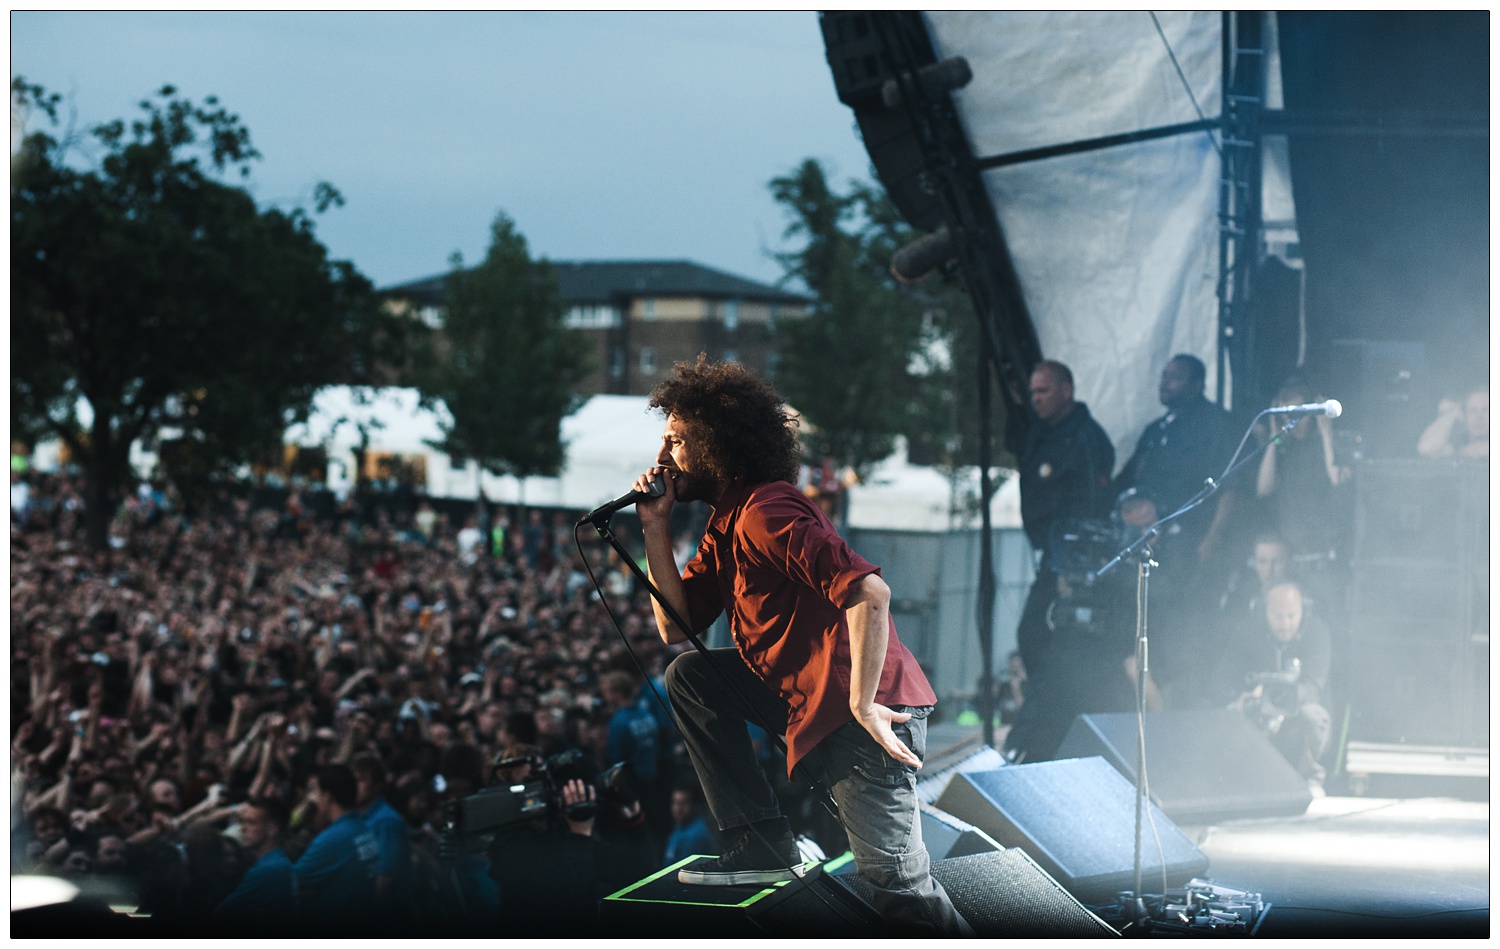 Zack de la Rocha performing to the crowd at the Finsbury Park Christmas number one Killing in the Name Rage Against the Machine gig.